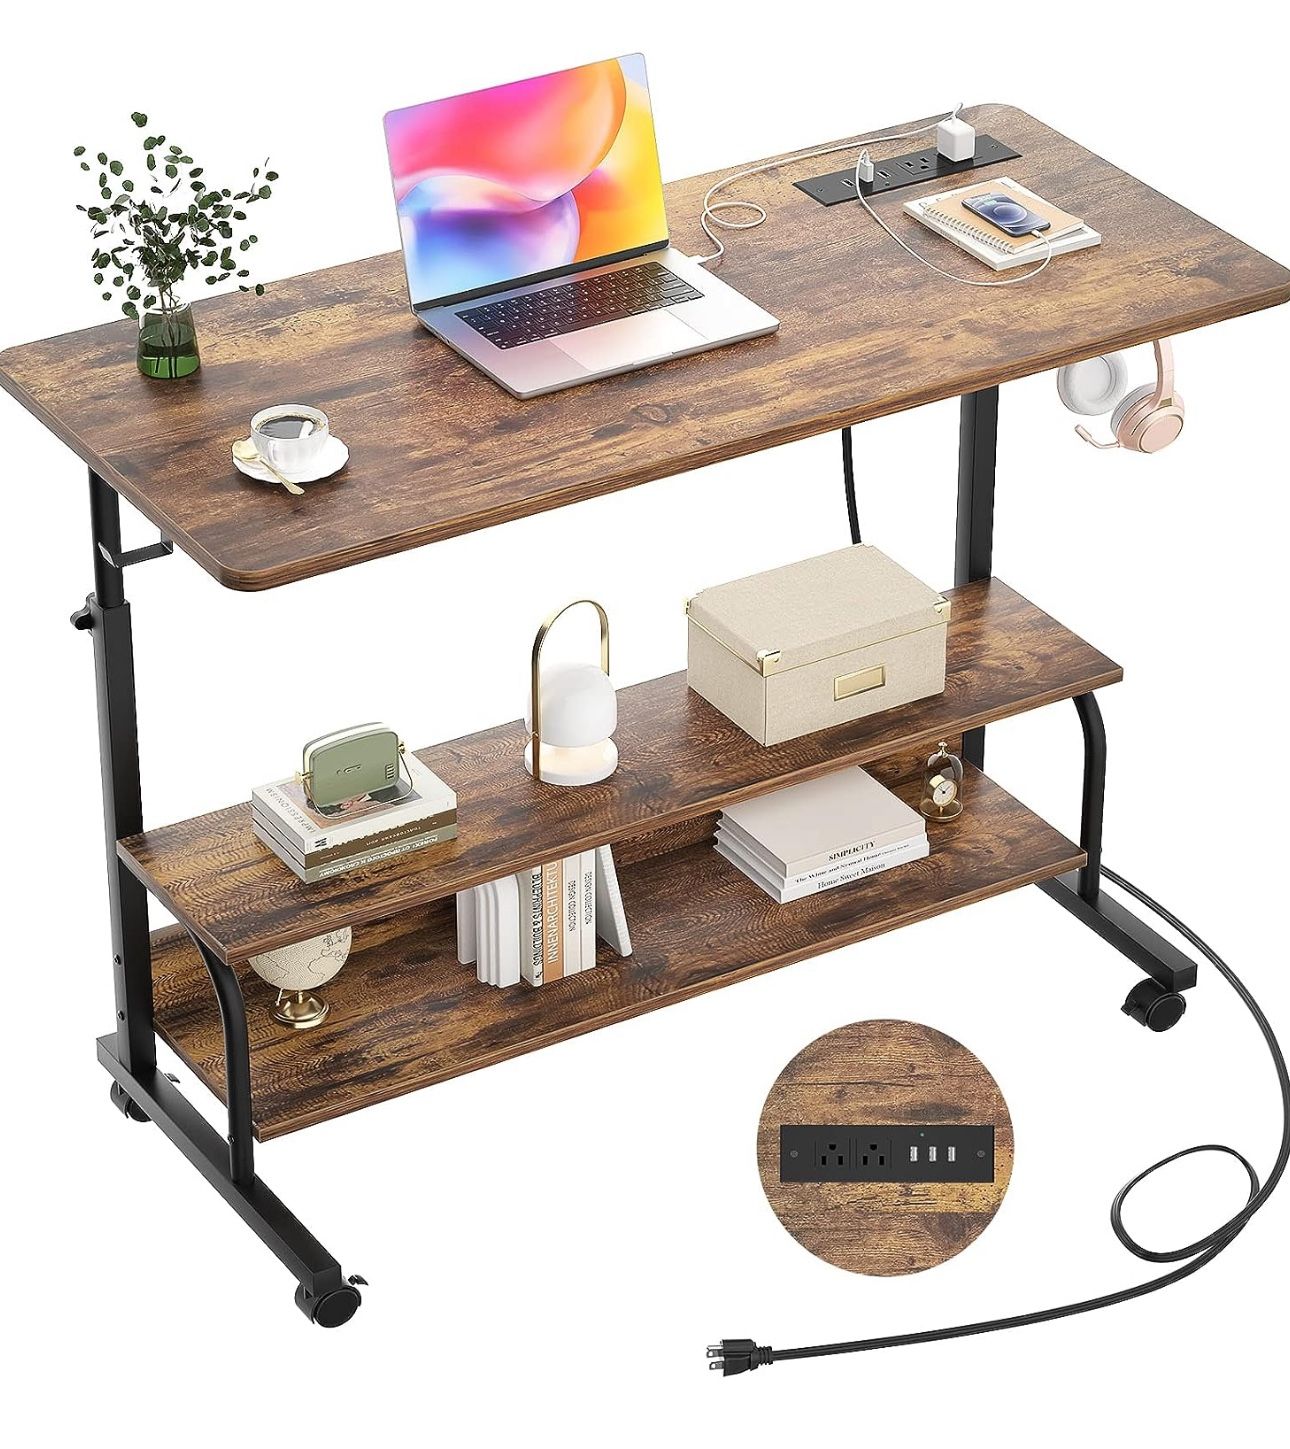 New Height Adjustable Standing Desk with Power Outlets, 39" Manual Stand Up Desk with Storage Shelves